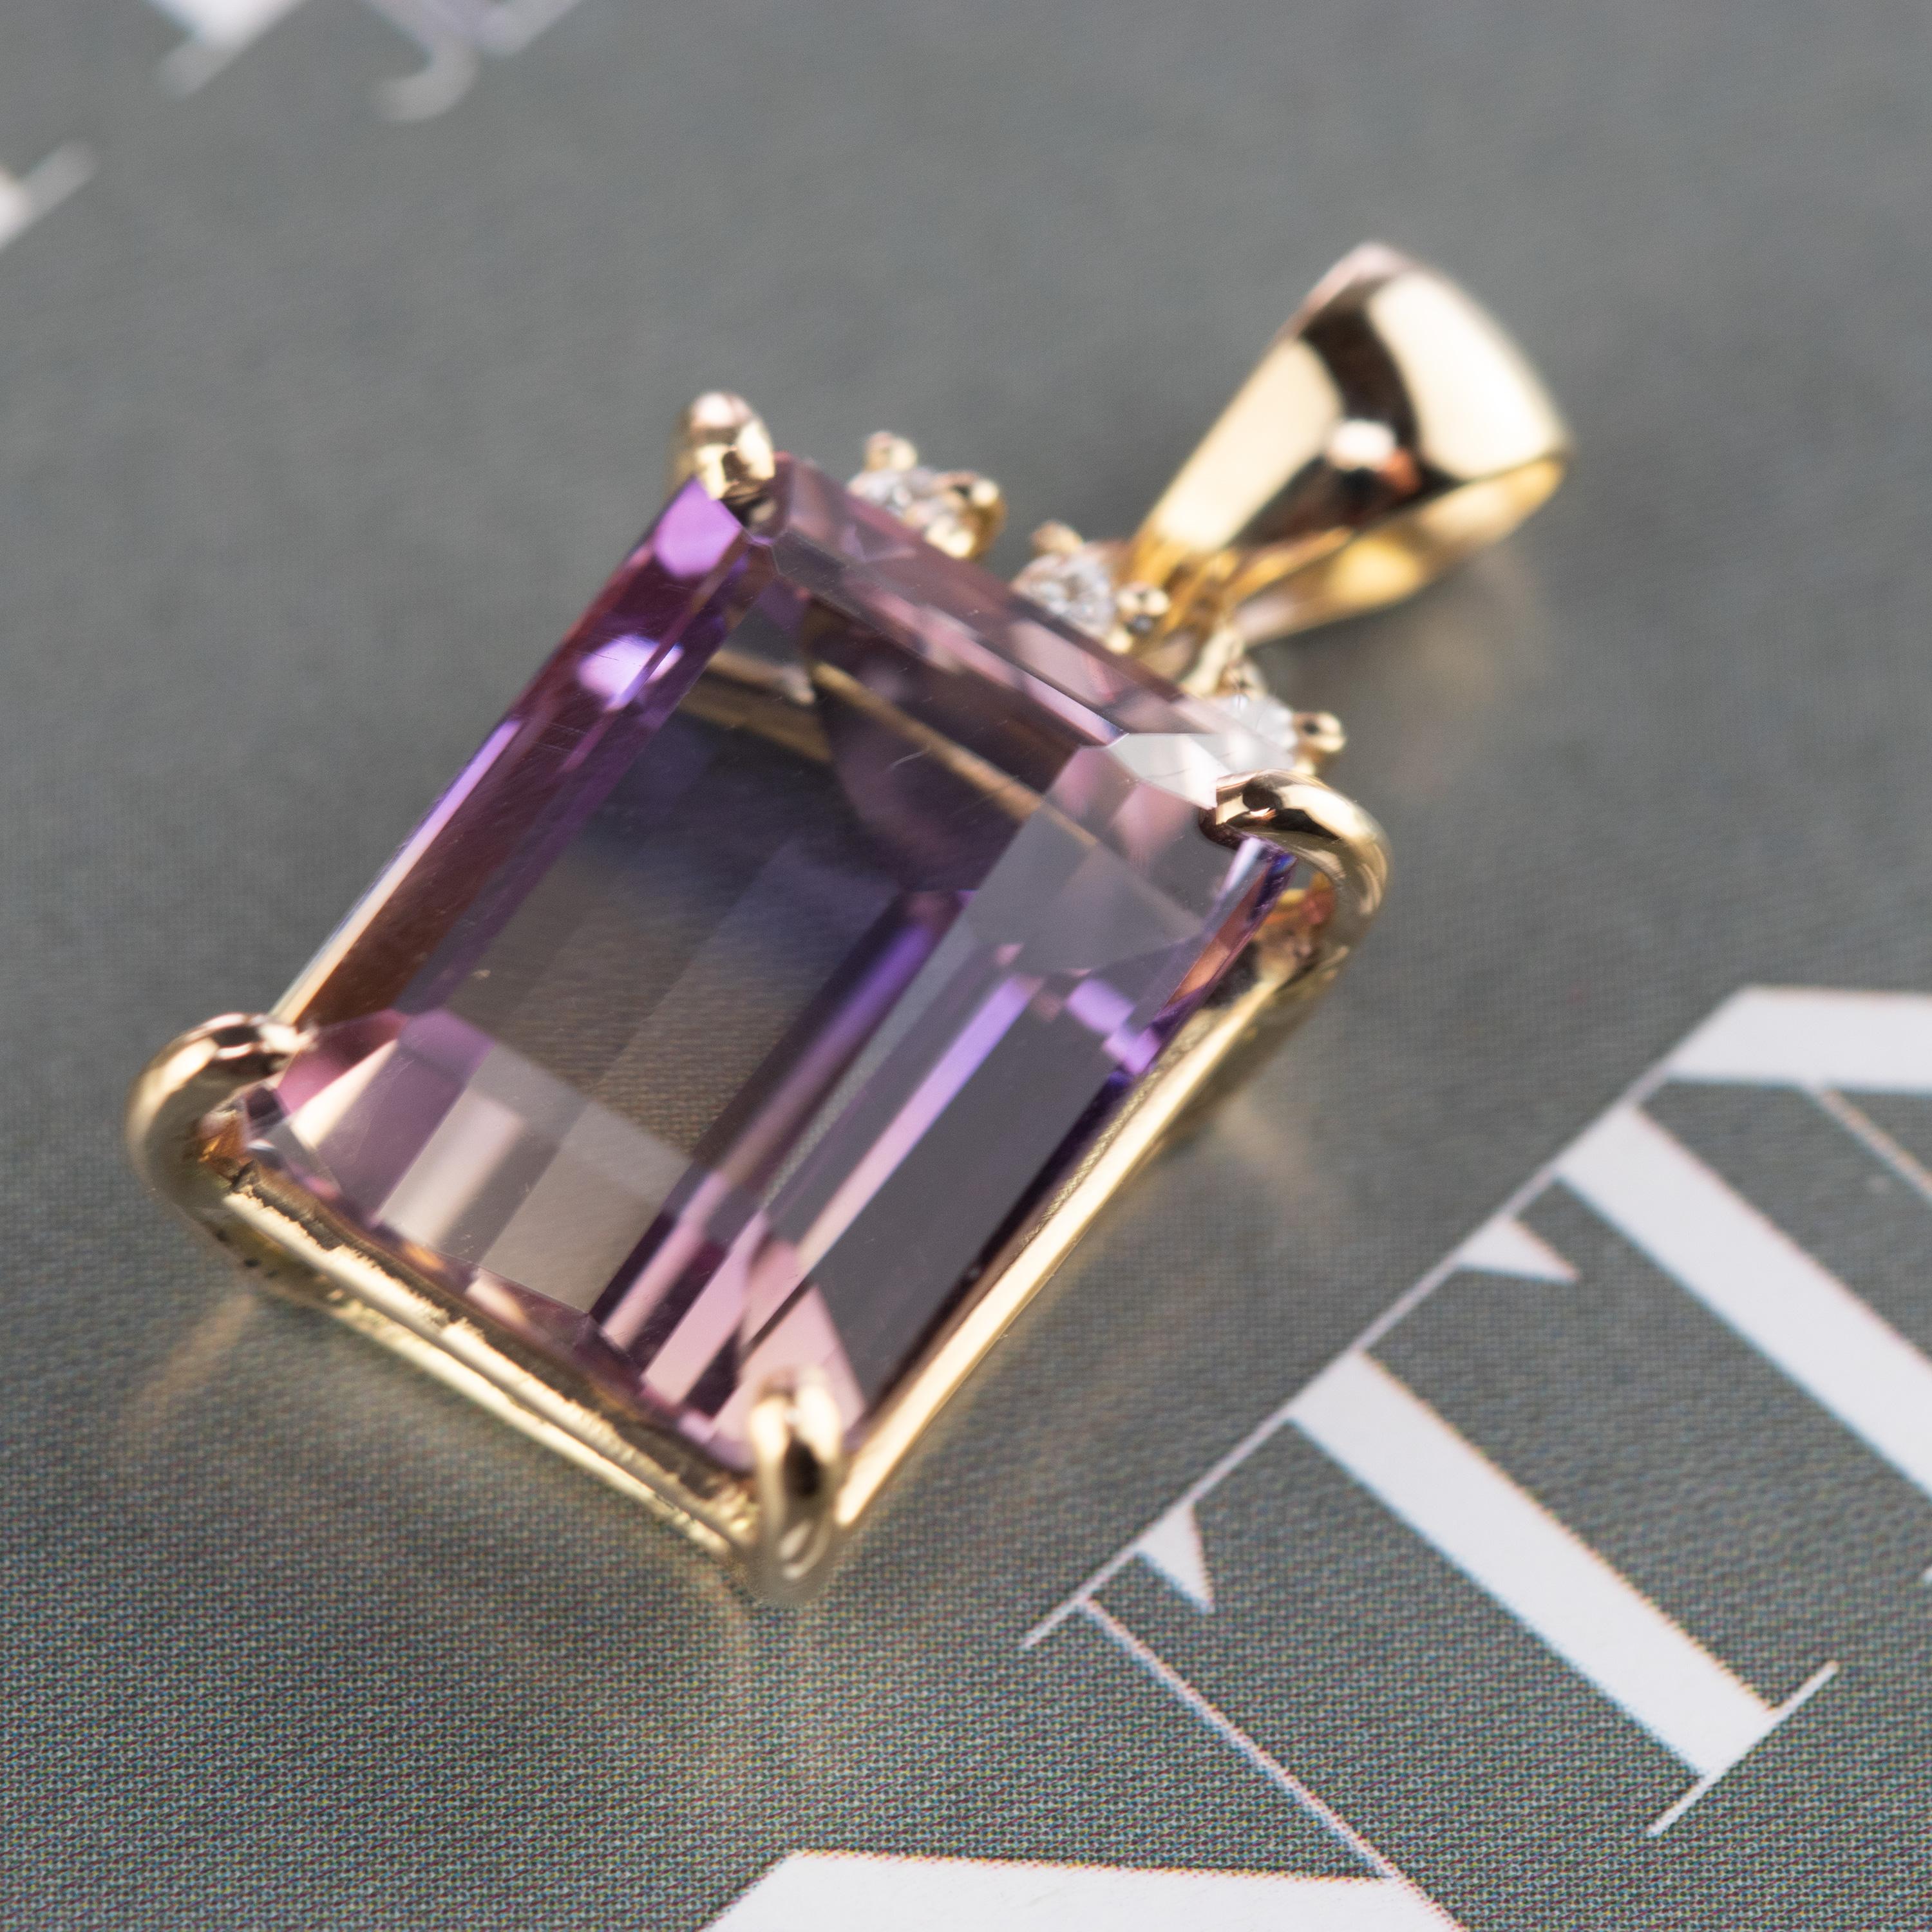 Stunning unique piece of Ametrine pendant enhanced by 3 brilliant diamonds on top inspired by the Victorian royalty look. Design decorated by 18 karat yellow gold. A vintage accessory ready to be part of a stunning outfit.

Ametrine, also known as